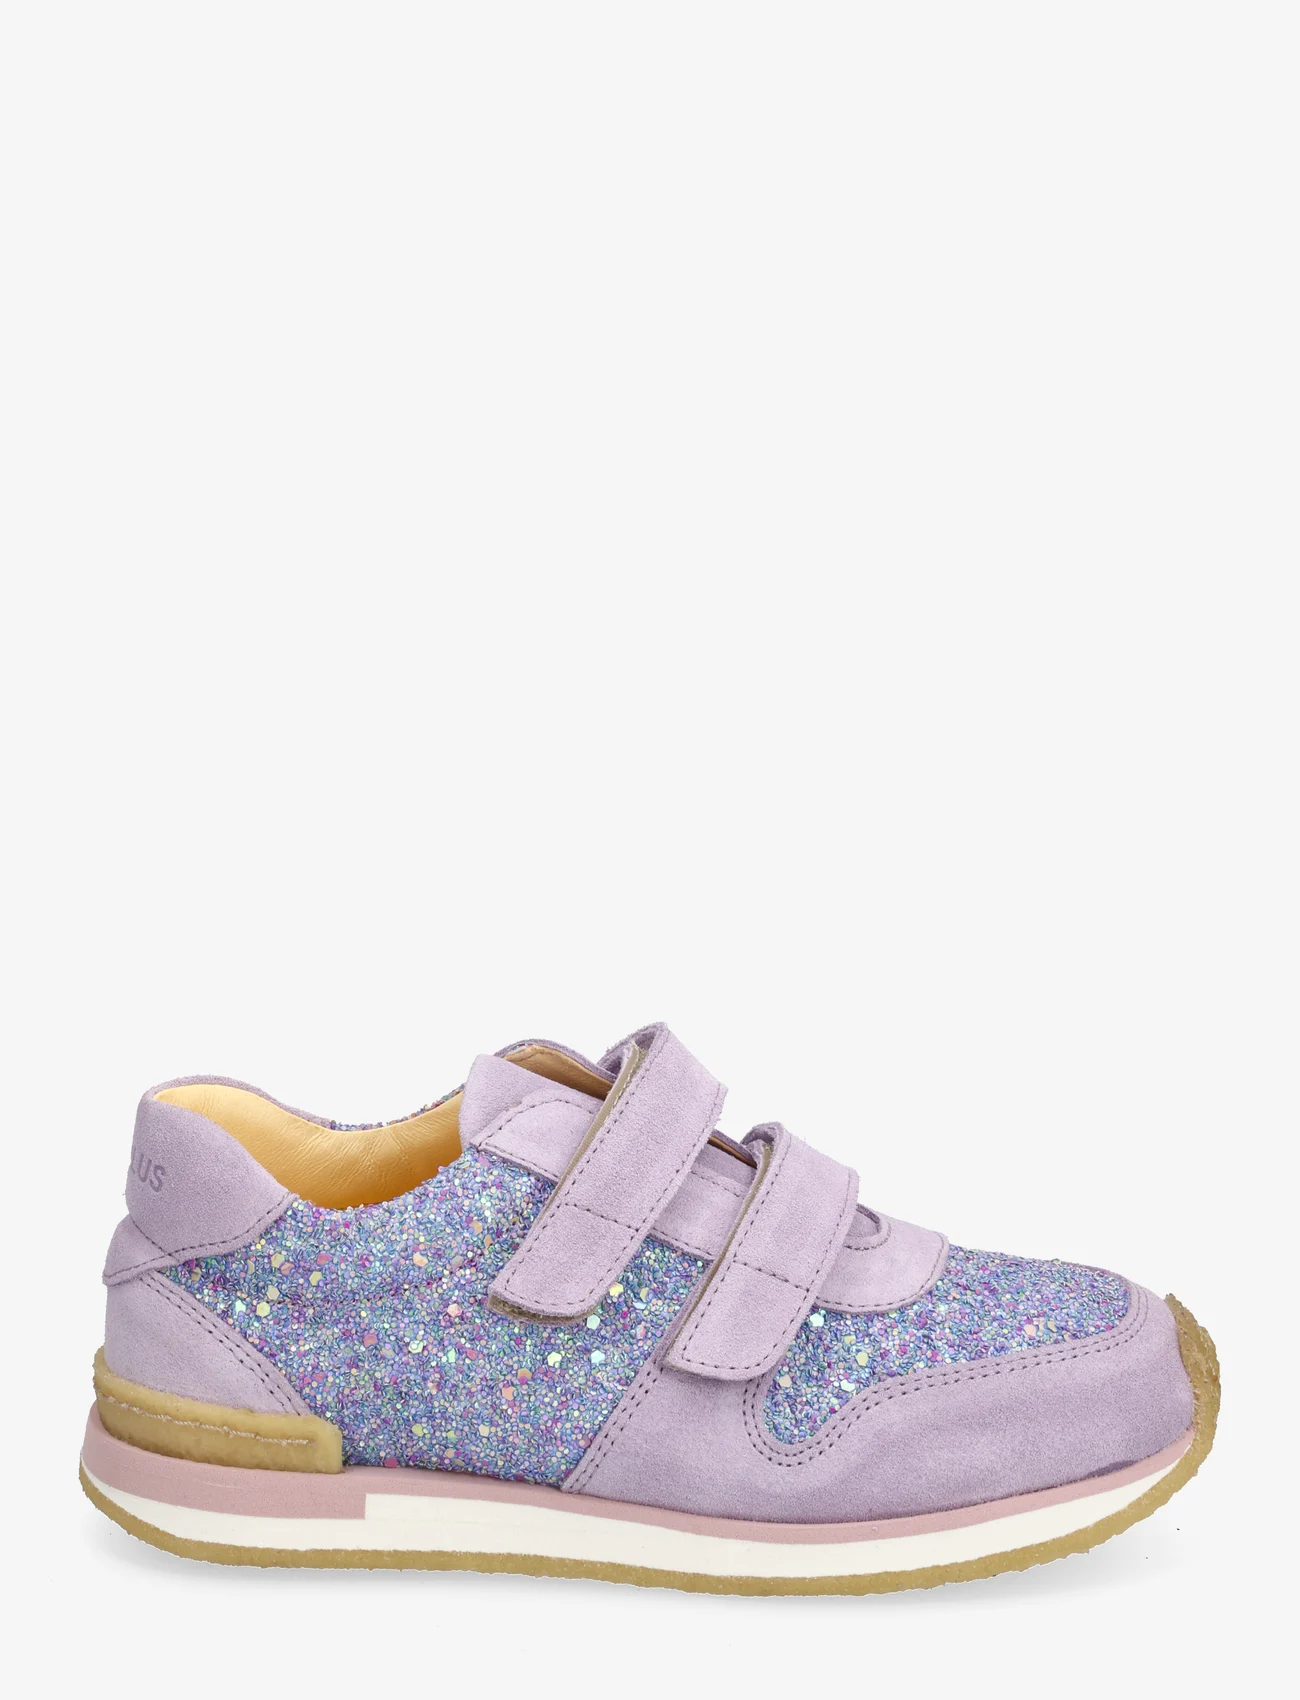 ANGULUS - Shoes - flat - with velcro - sommerschnäppchen - 2245/2753 lilac/confetti glitt - 1